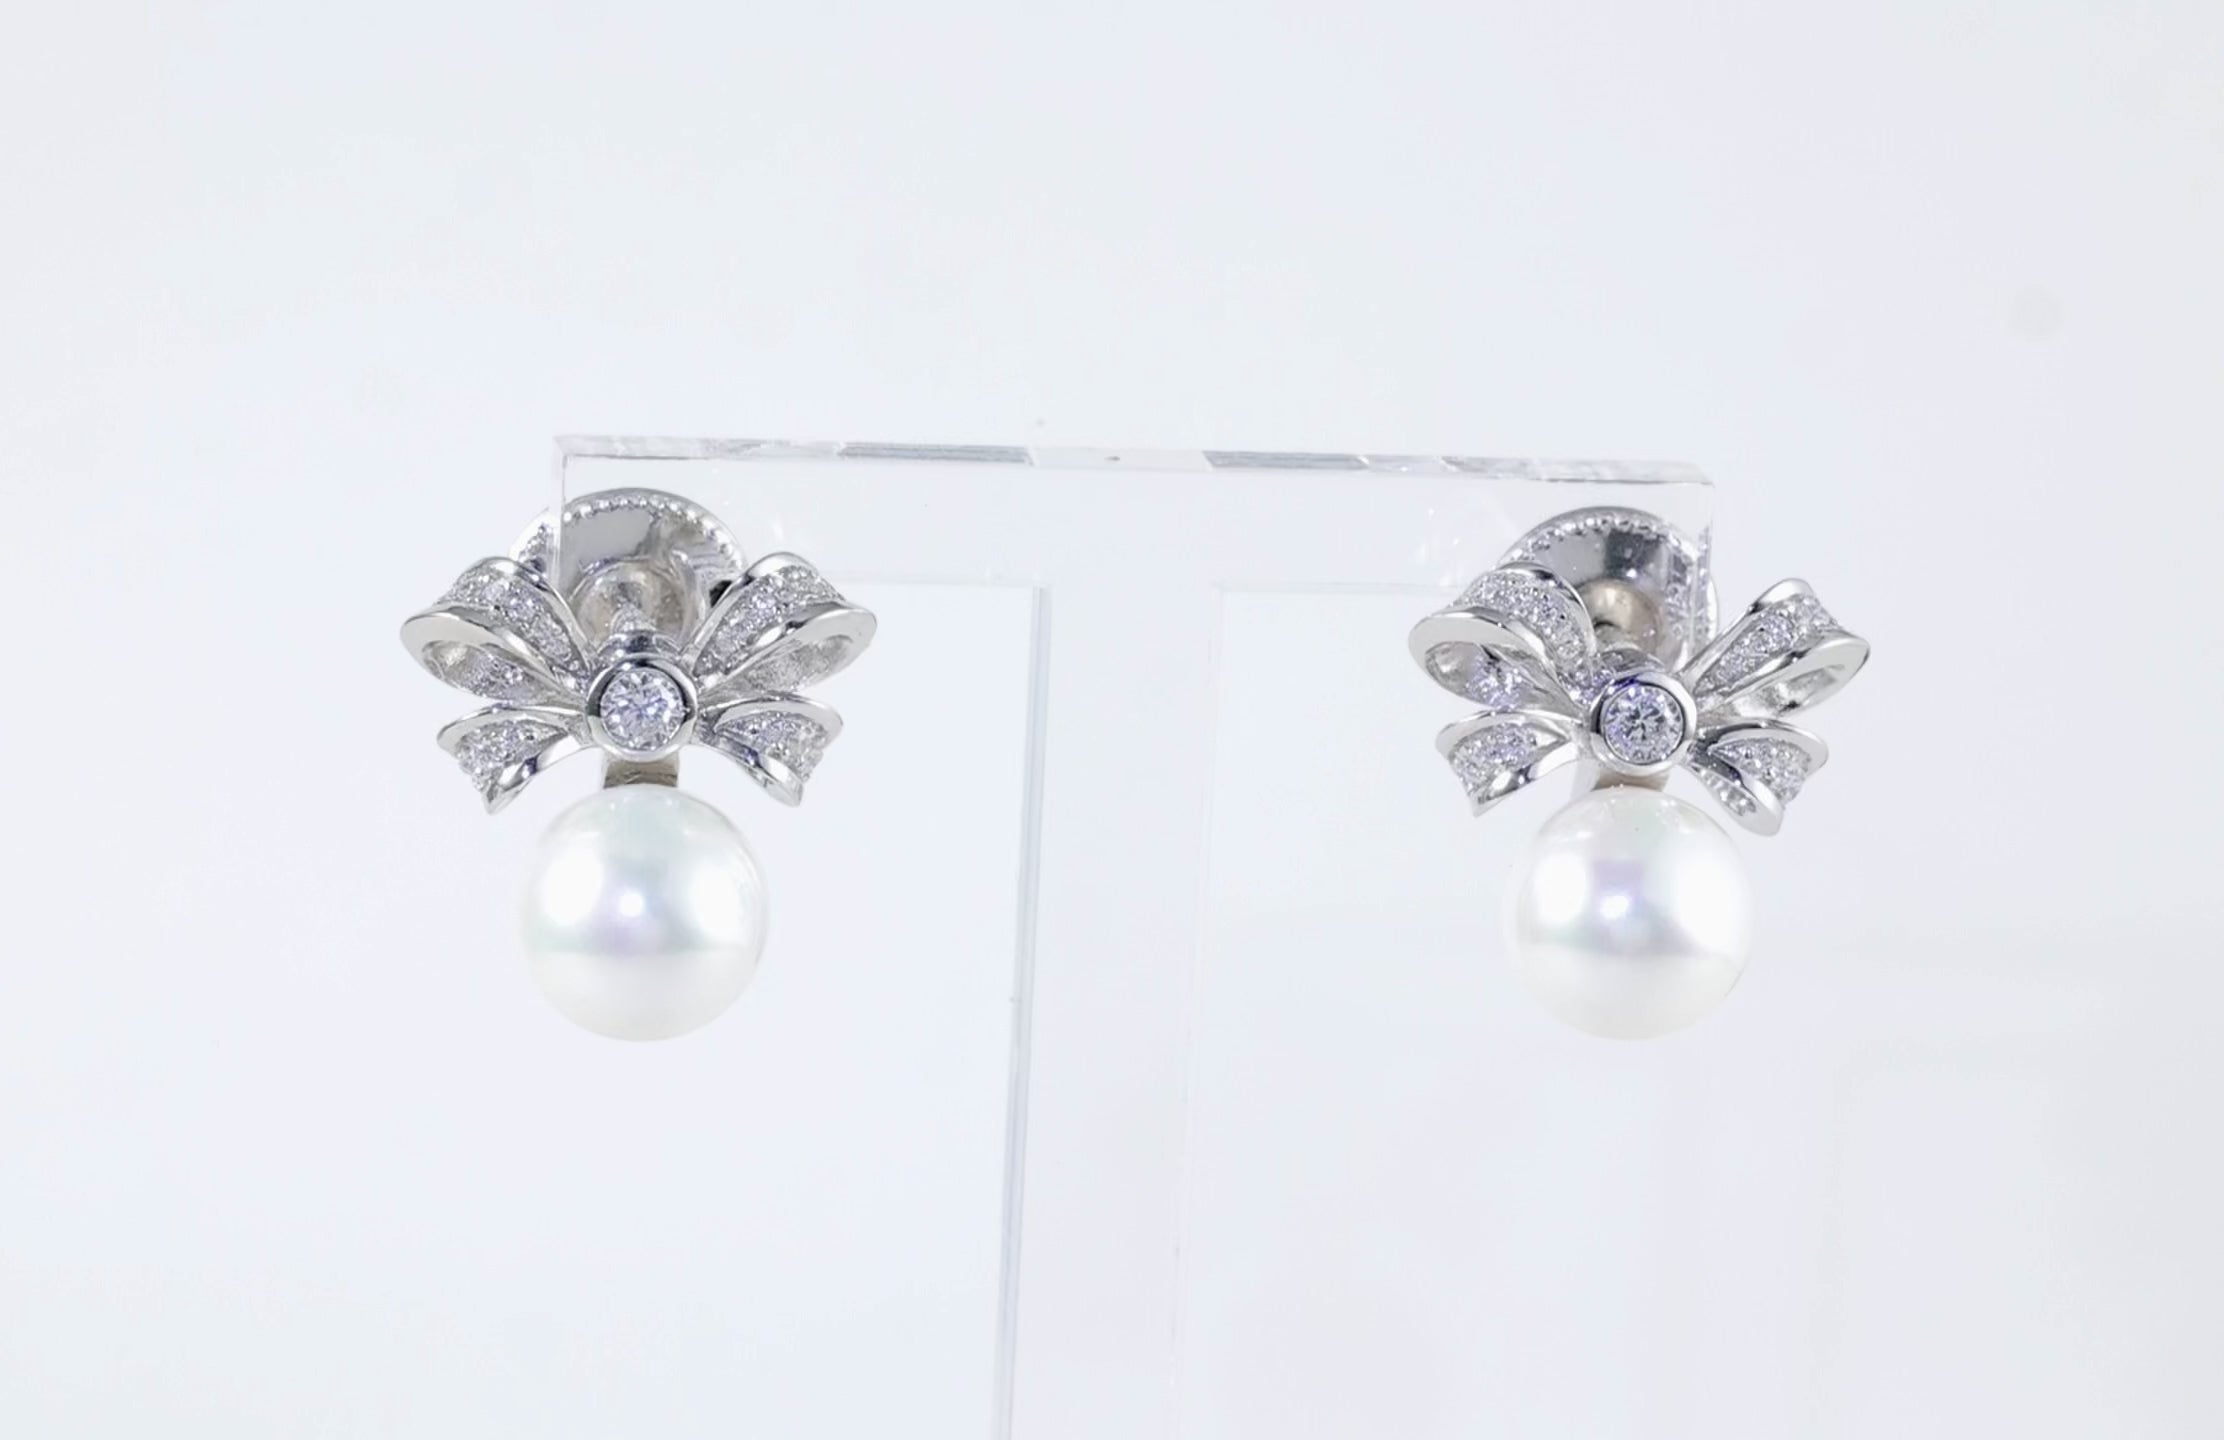 'Viscountess' Bow and Pearl Silver Earrings with Crystals